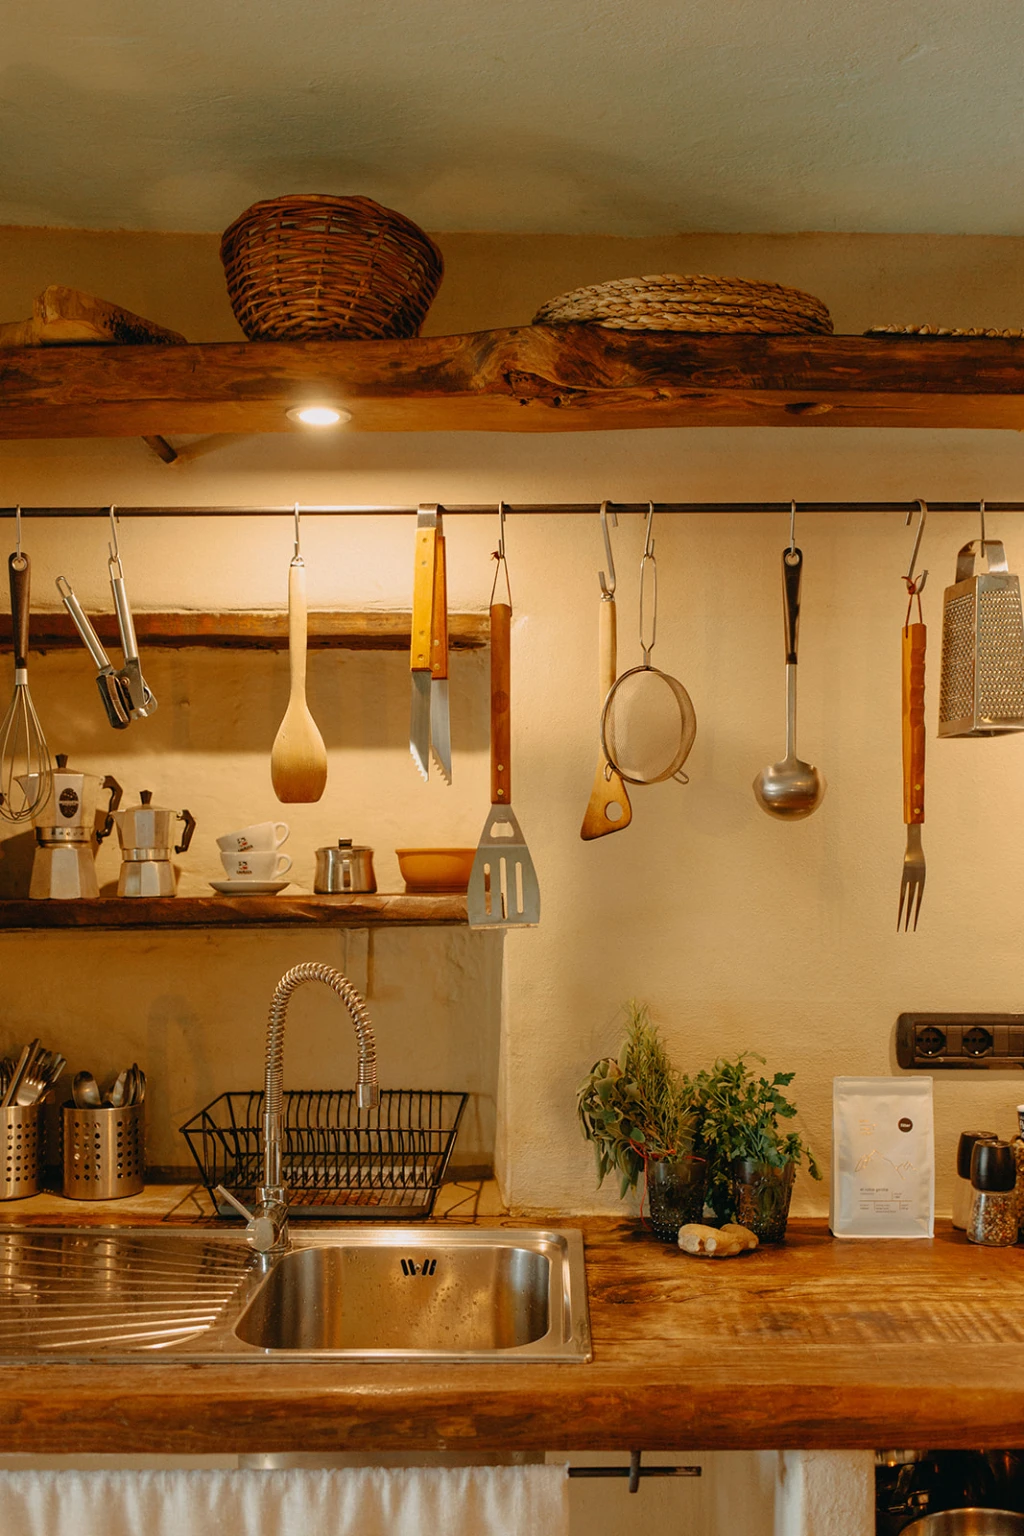 A kitchen for amateur chefs and foodies. The best Italian Cuisine comes out of this kitchen